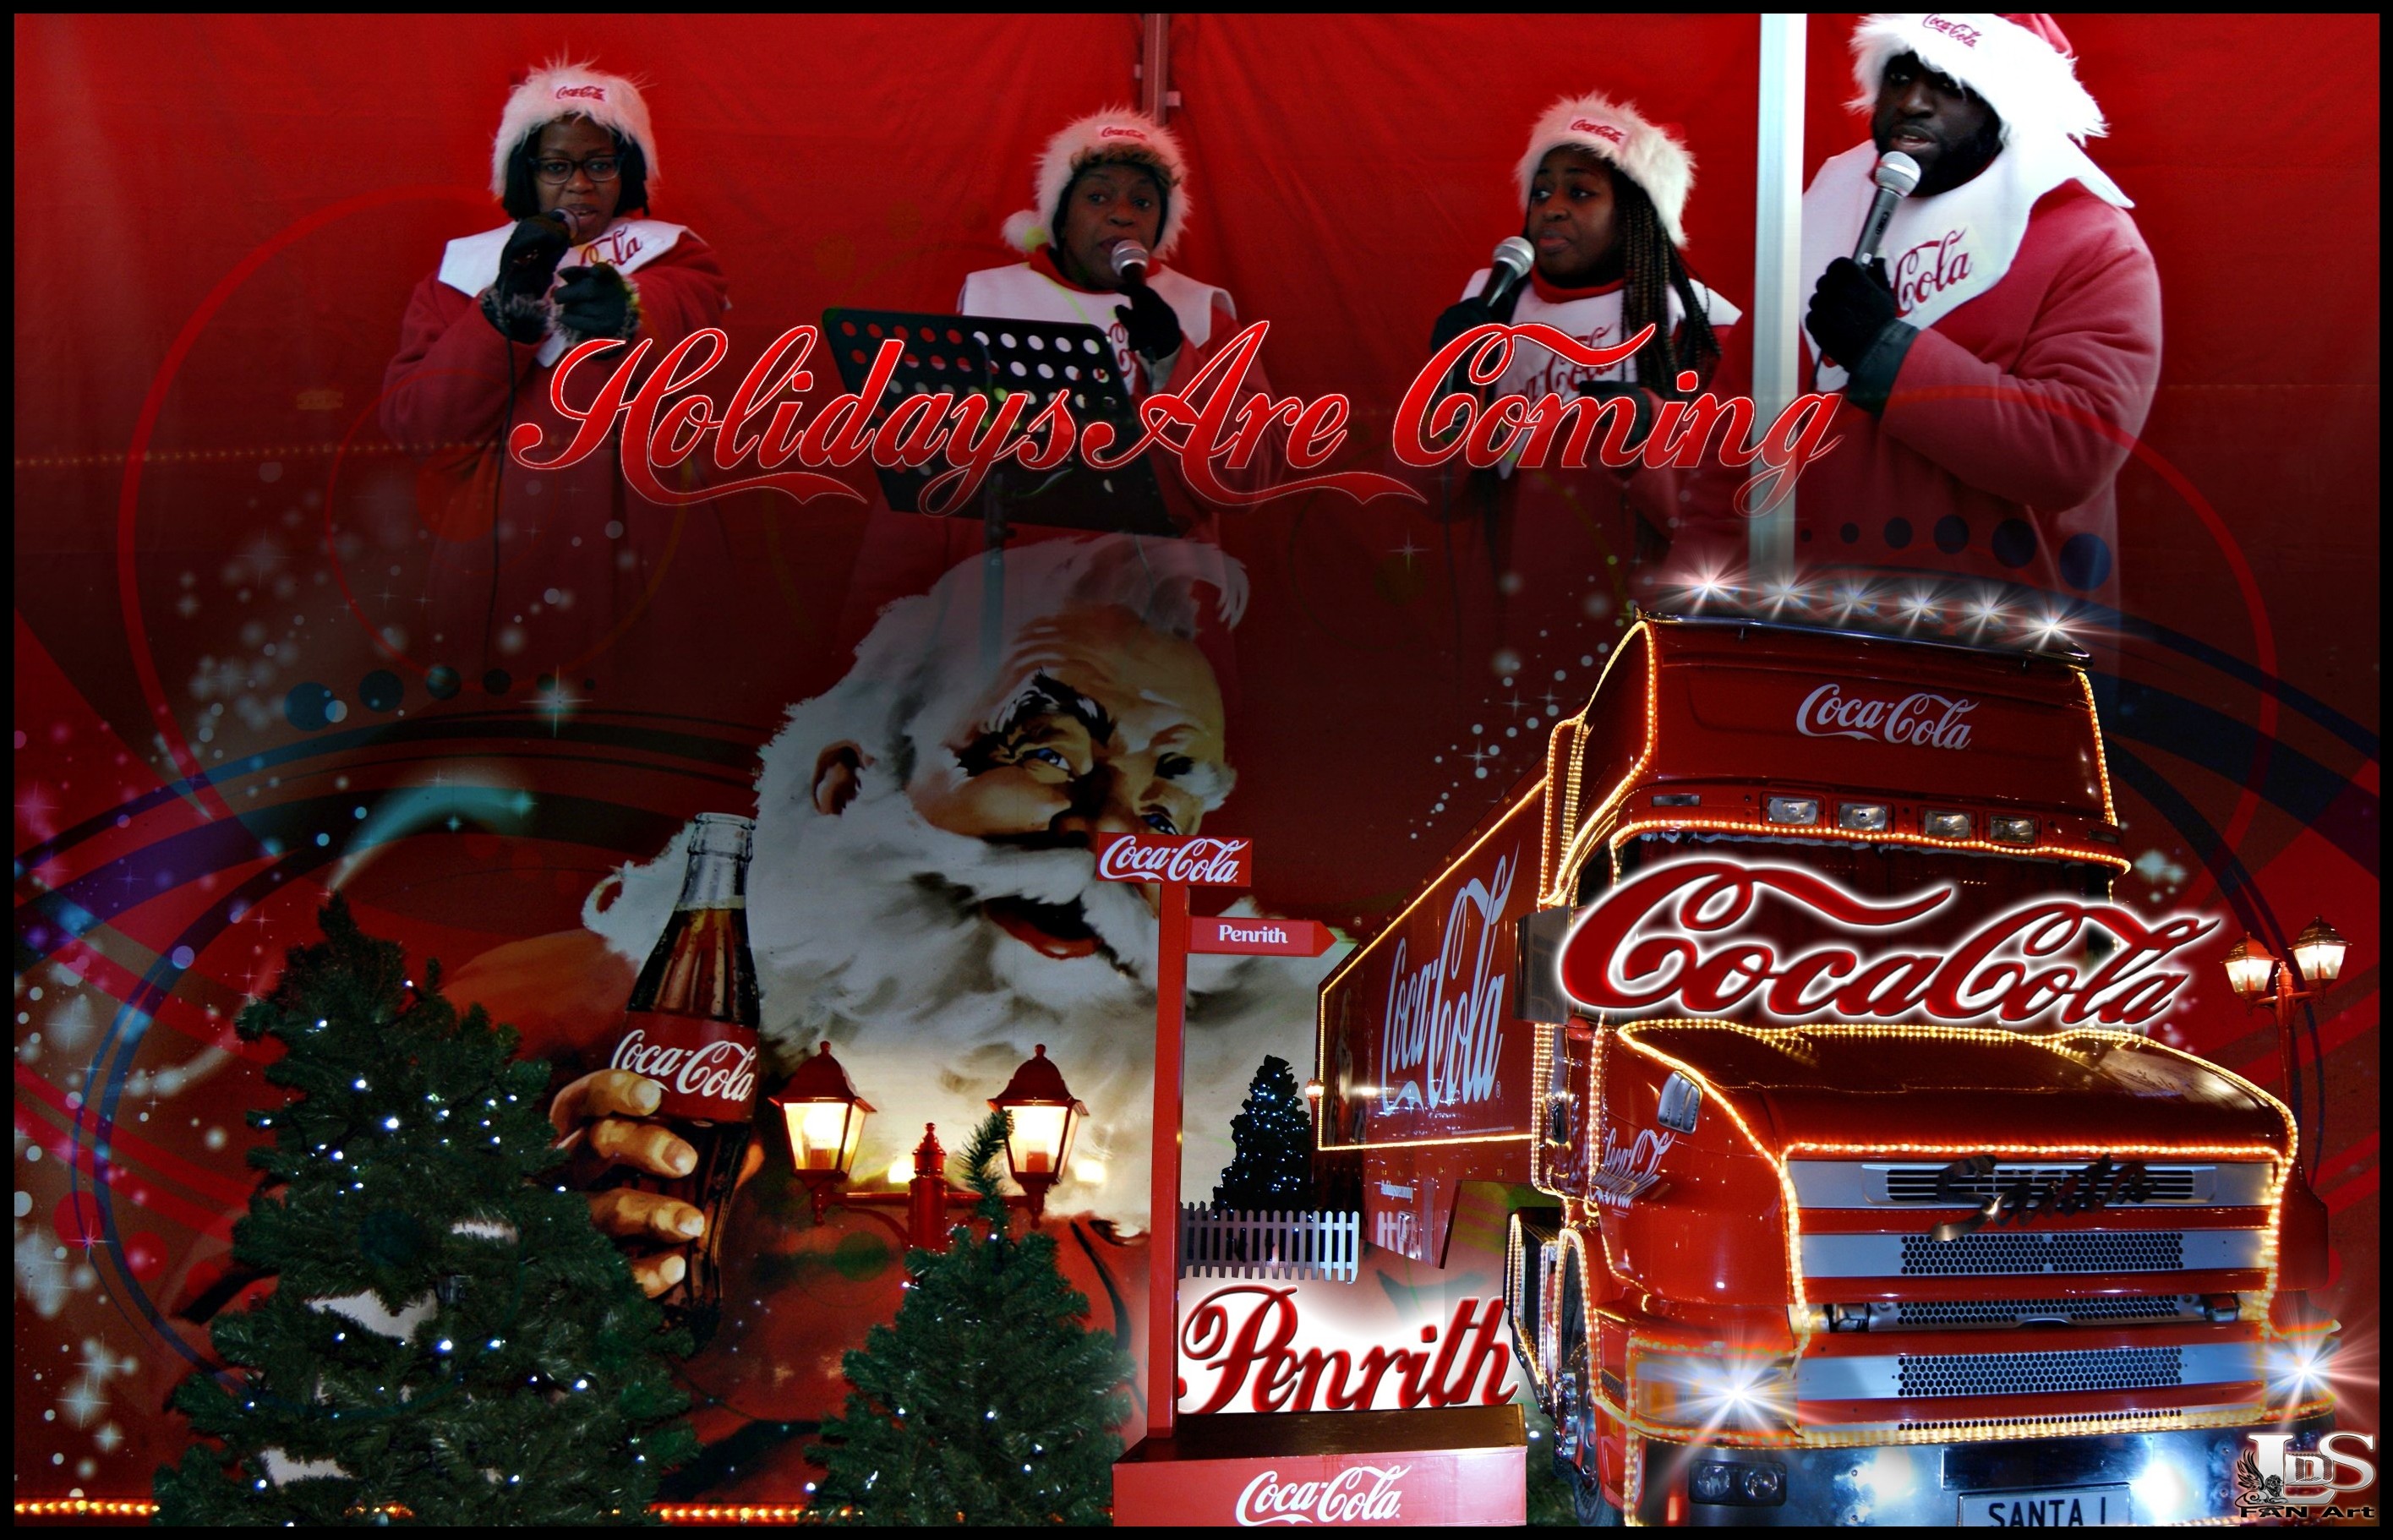 2831x1822 CocaCola- images Coca-Cola ChristmasTruck Holidays Are Coming HD wallpaper  and background photos